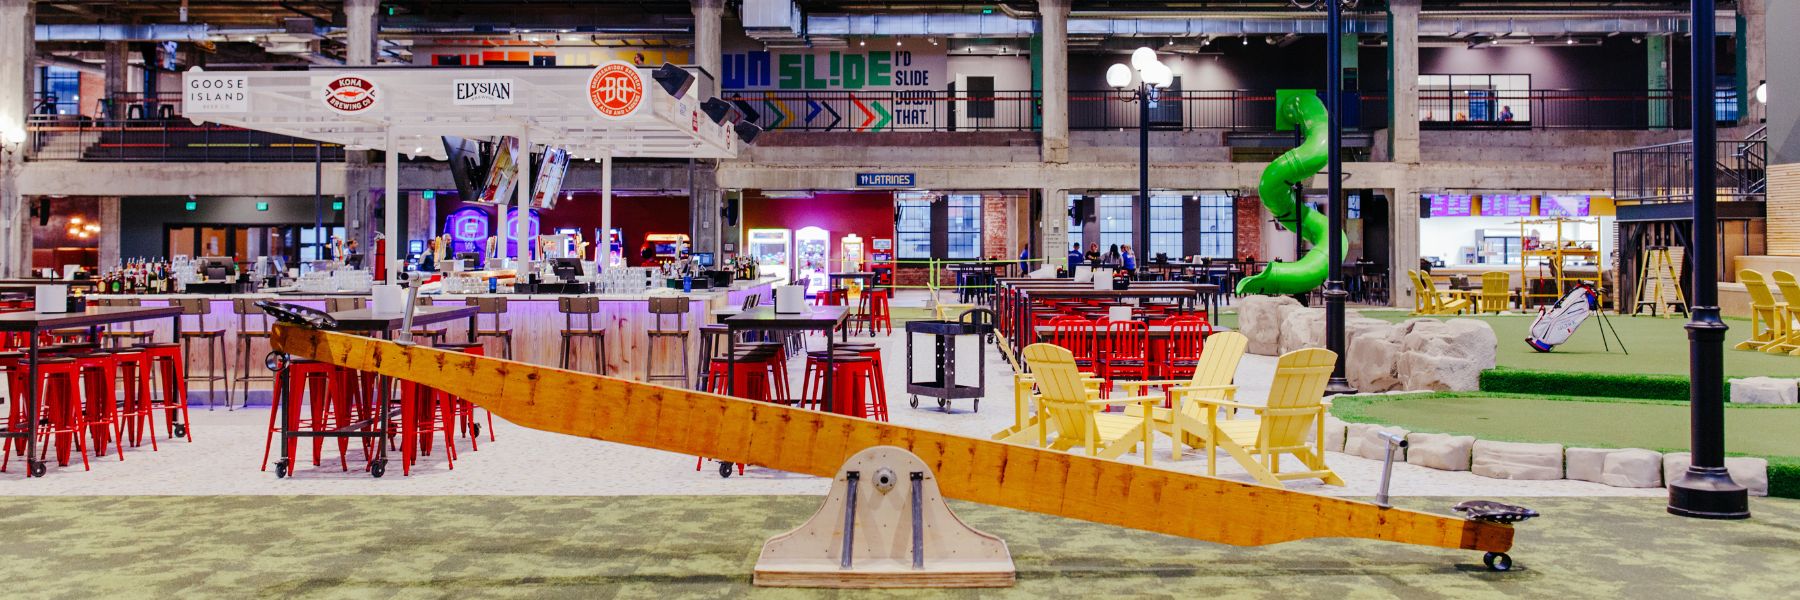 Armory STL, a new entertainment district, offers everything from adult seesaws to cold drinks.